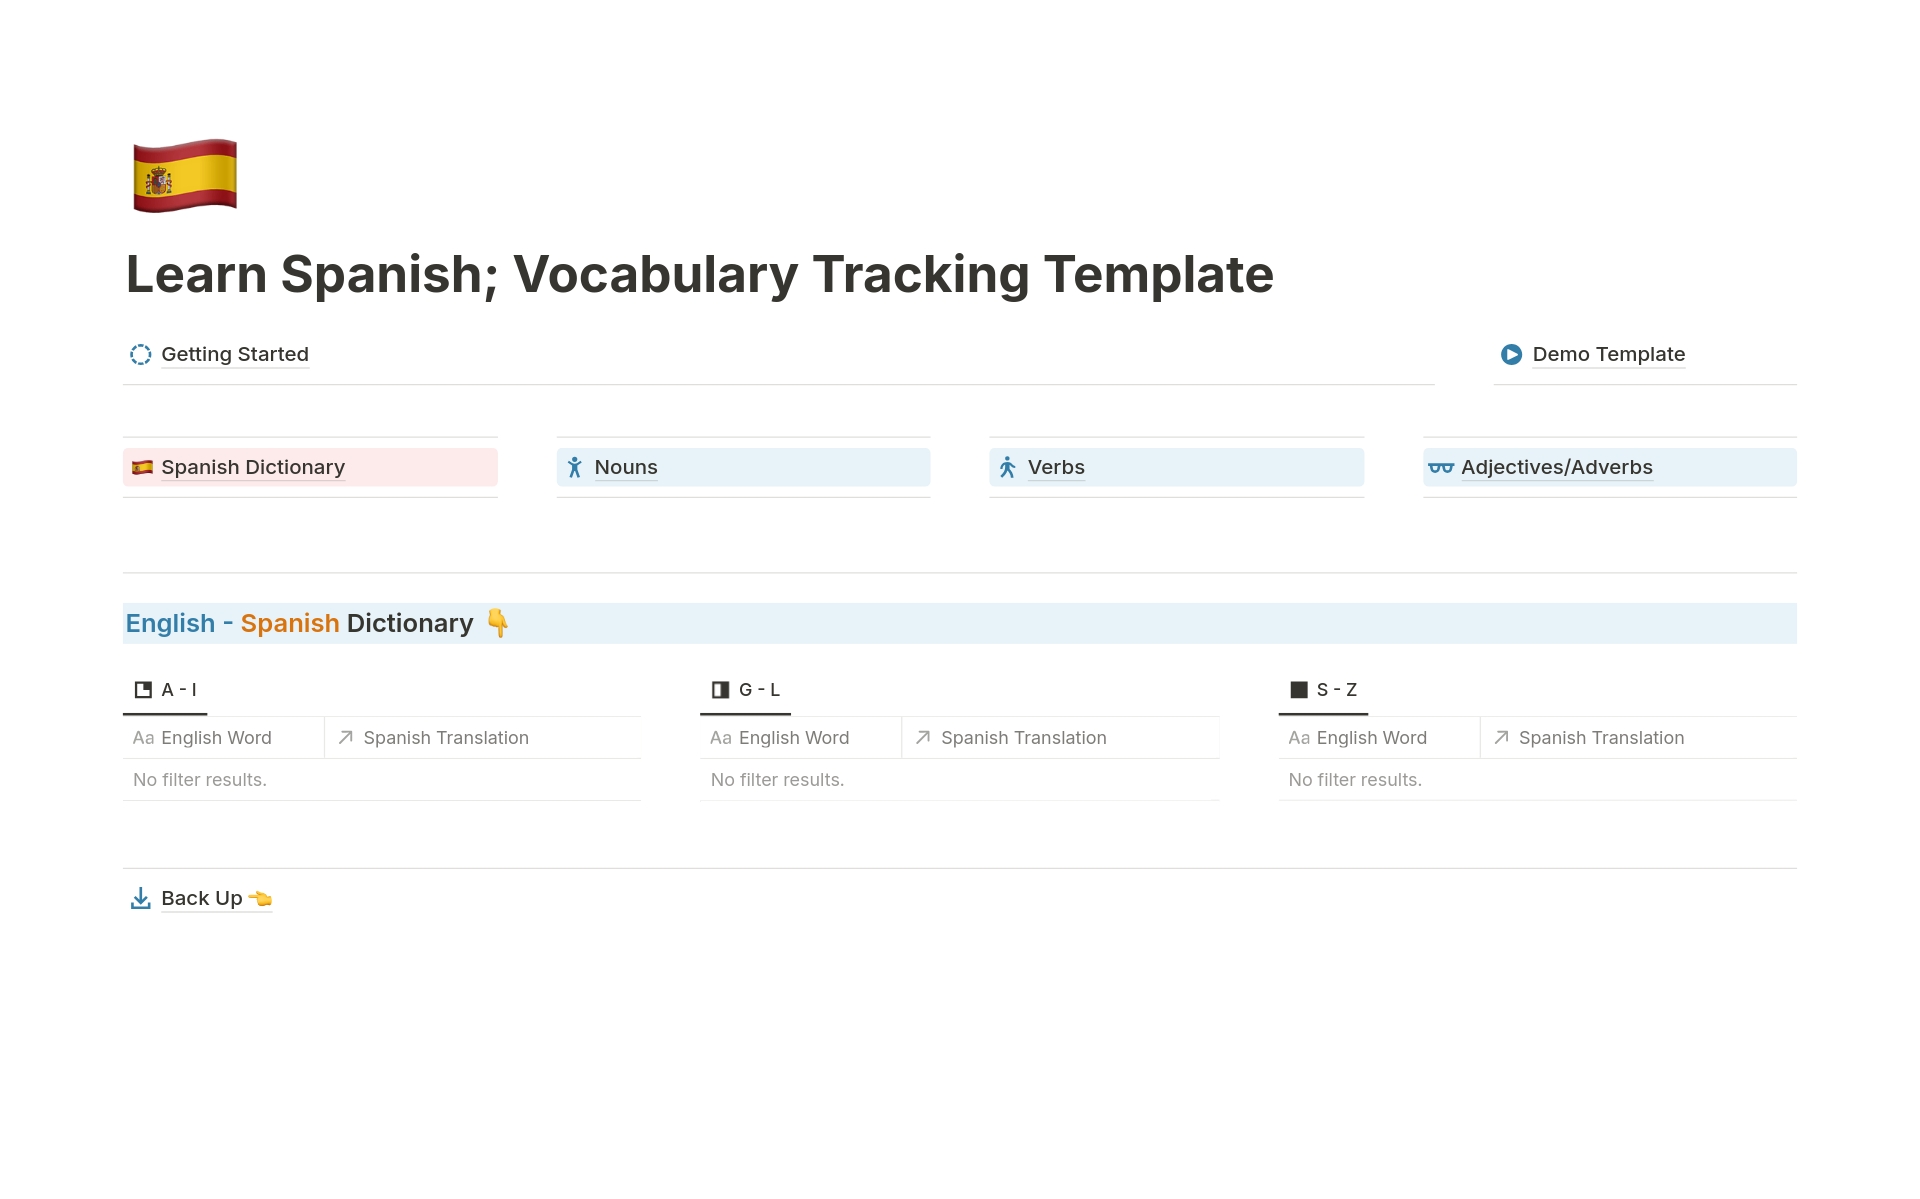 This template allows you to create an English to Spanish dictionary as you document your learning progress.